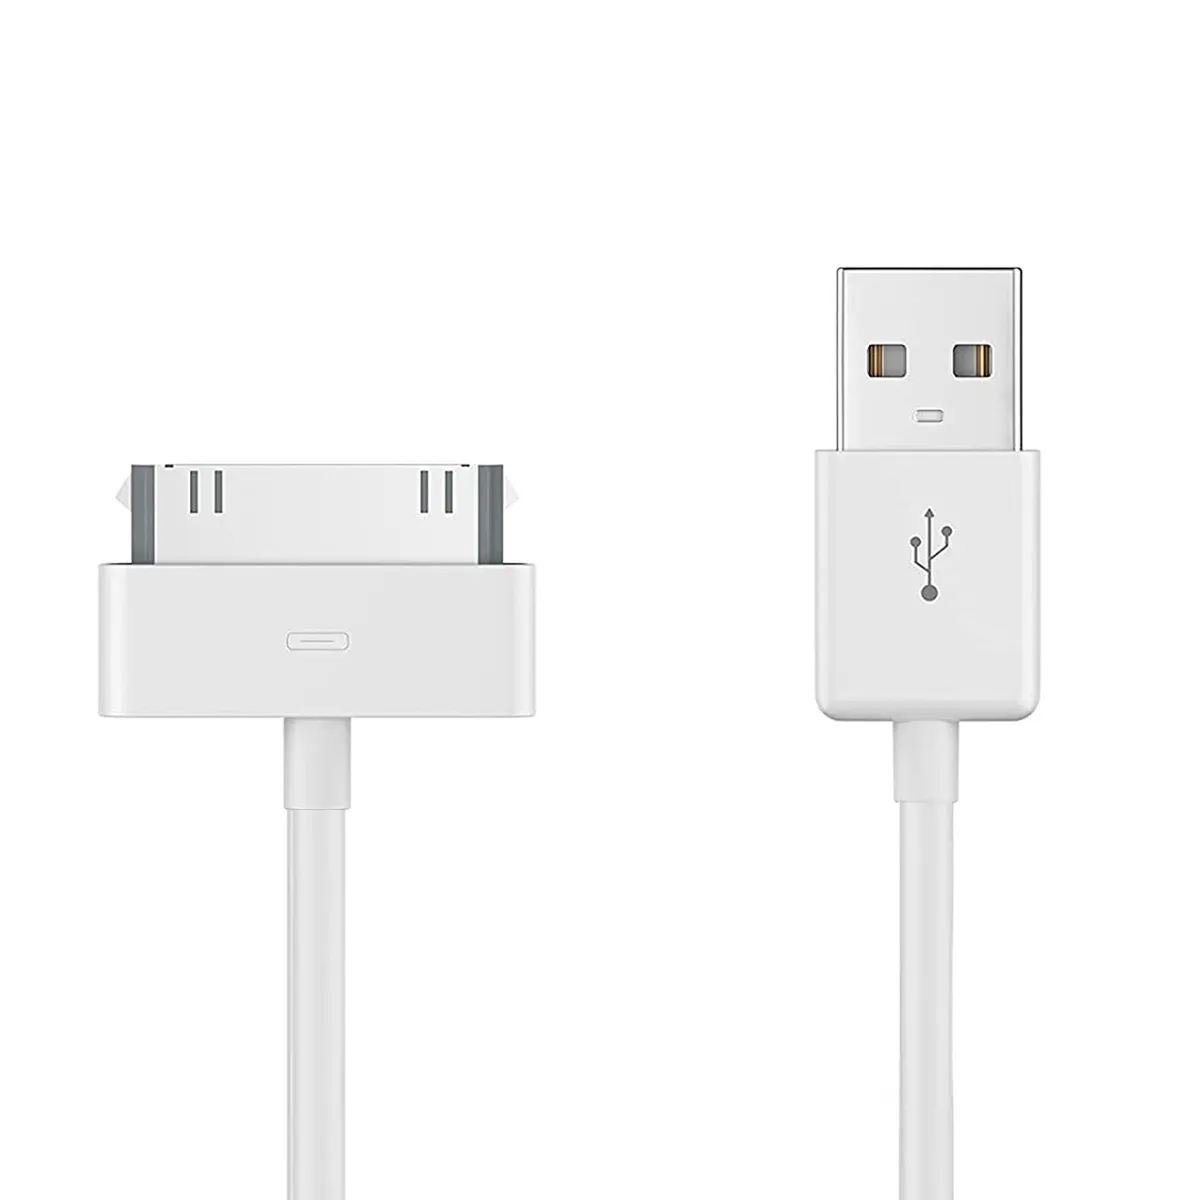 Charging Cable Charger for iPhone 4, 3GS, iPod, | eBay